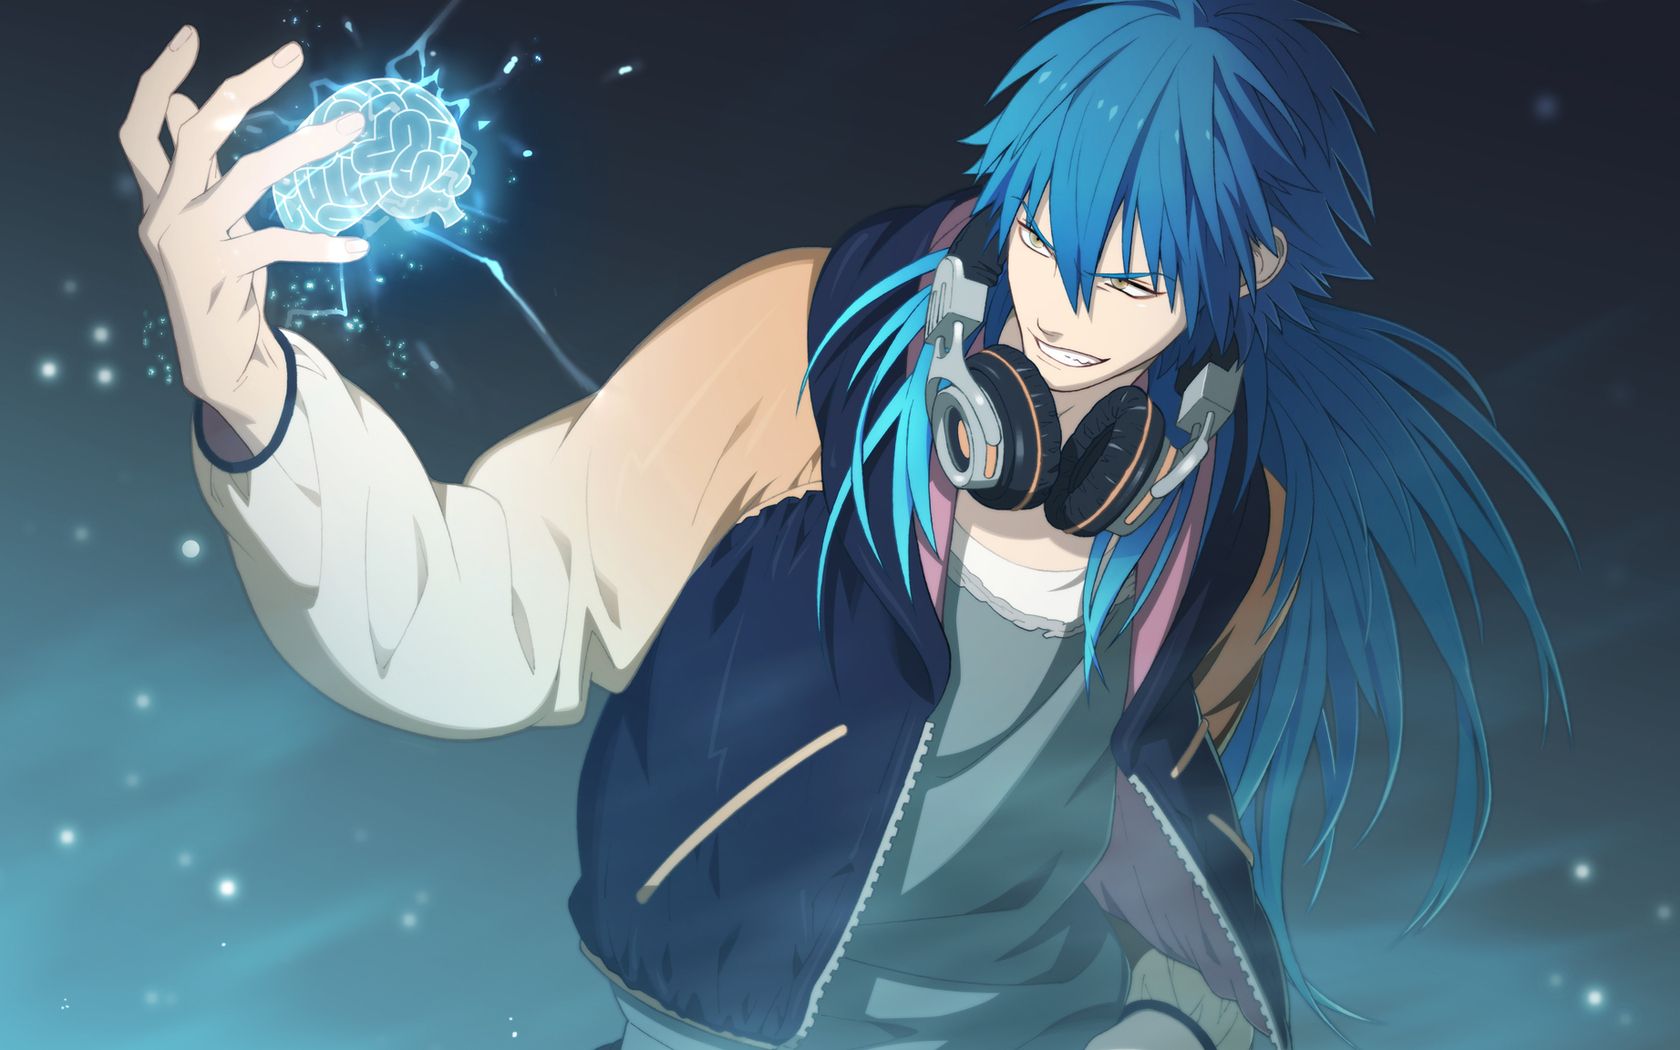 Free download Blue Haired Anime Boy Wallpaper 1680x1050 904441 [1680x1050] for your Desktop, Mobile & Tablet. Explore Blue Anime Wallpaper. Anime Wallpaper Sites, Cool Anime Wallpaper for Desktop, Anime Gamer Wallpaper